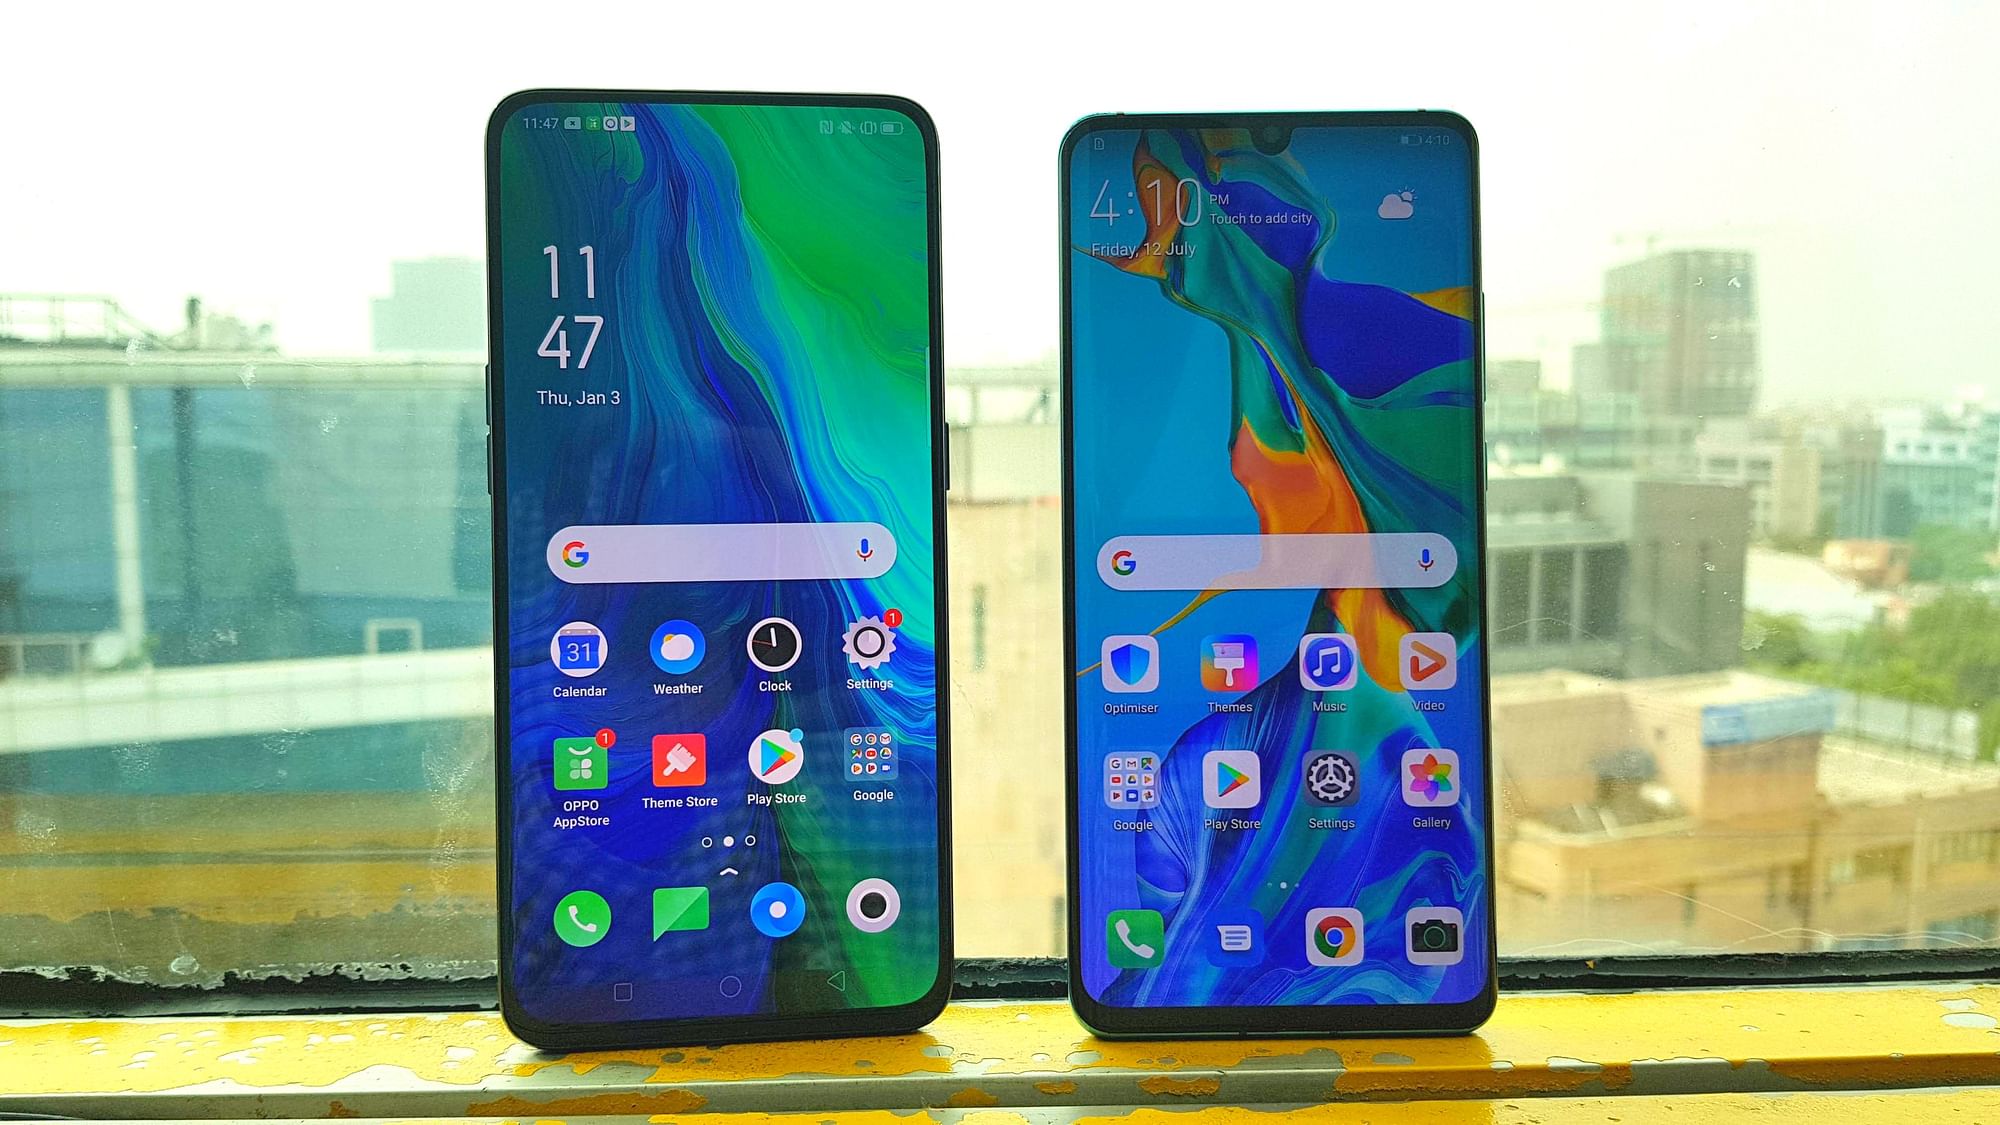 Huawei P30 Pro (right) claims the DXOMark score of 112, as the highest for any smartphone camera.